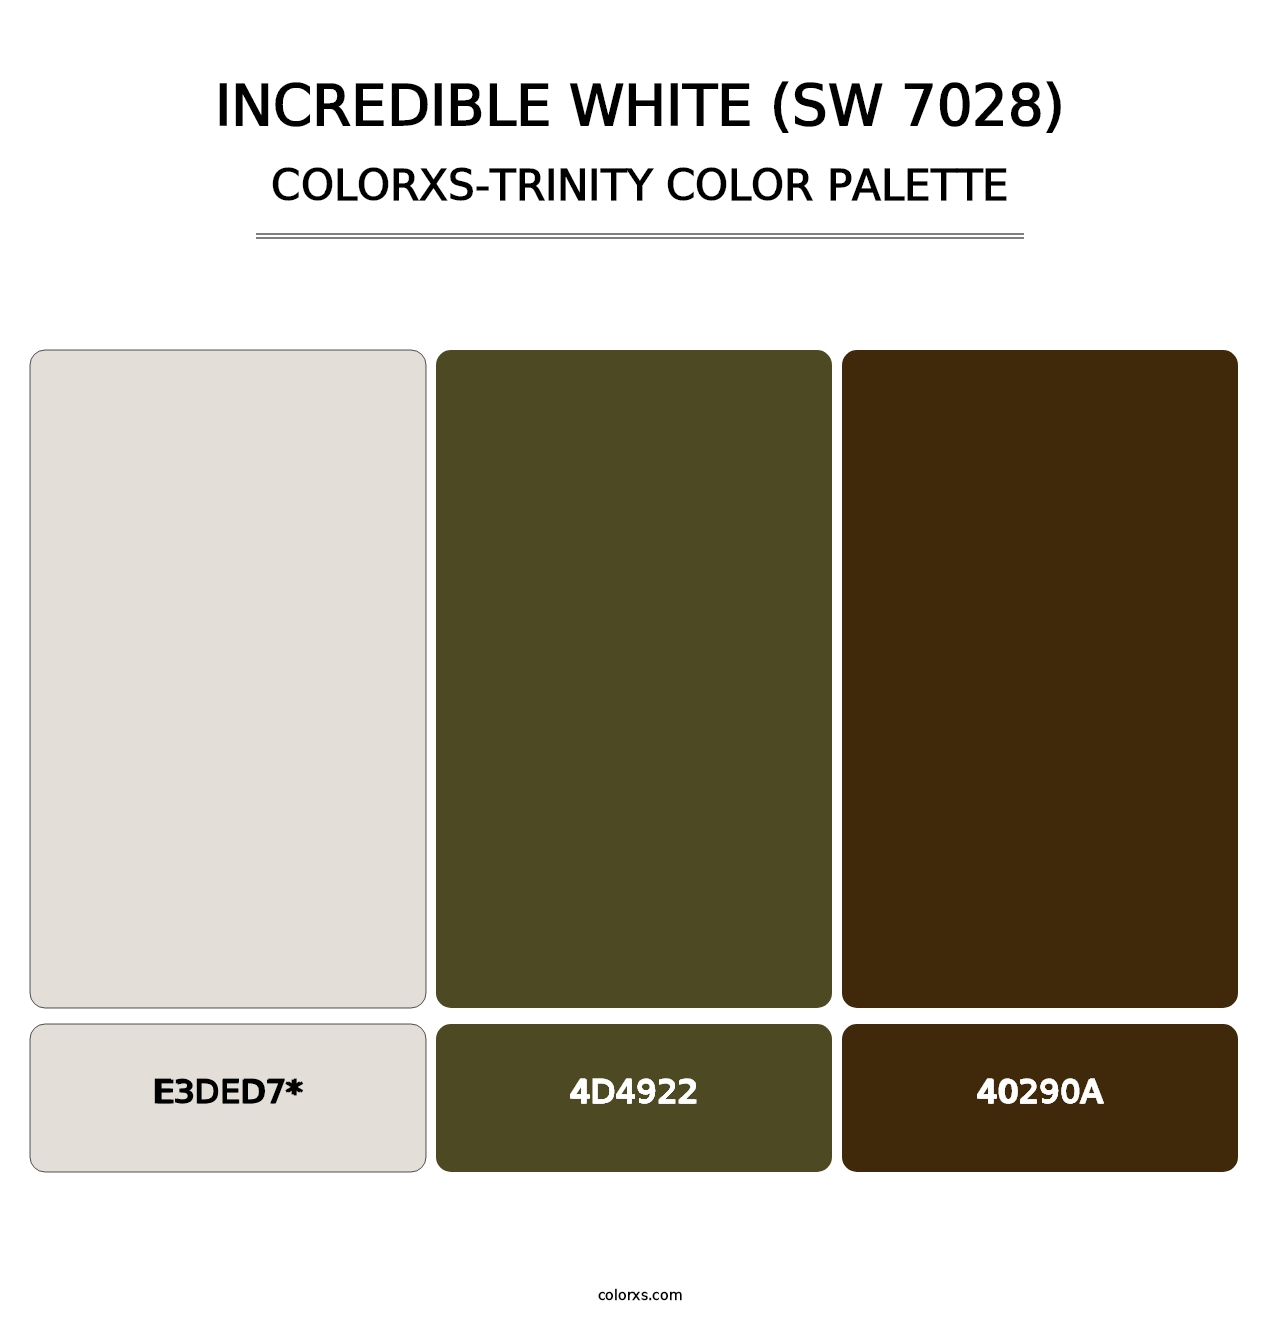 Incredible White (SW 7028) - Colorxs Trinity Palette